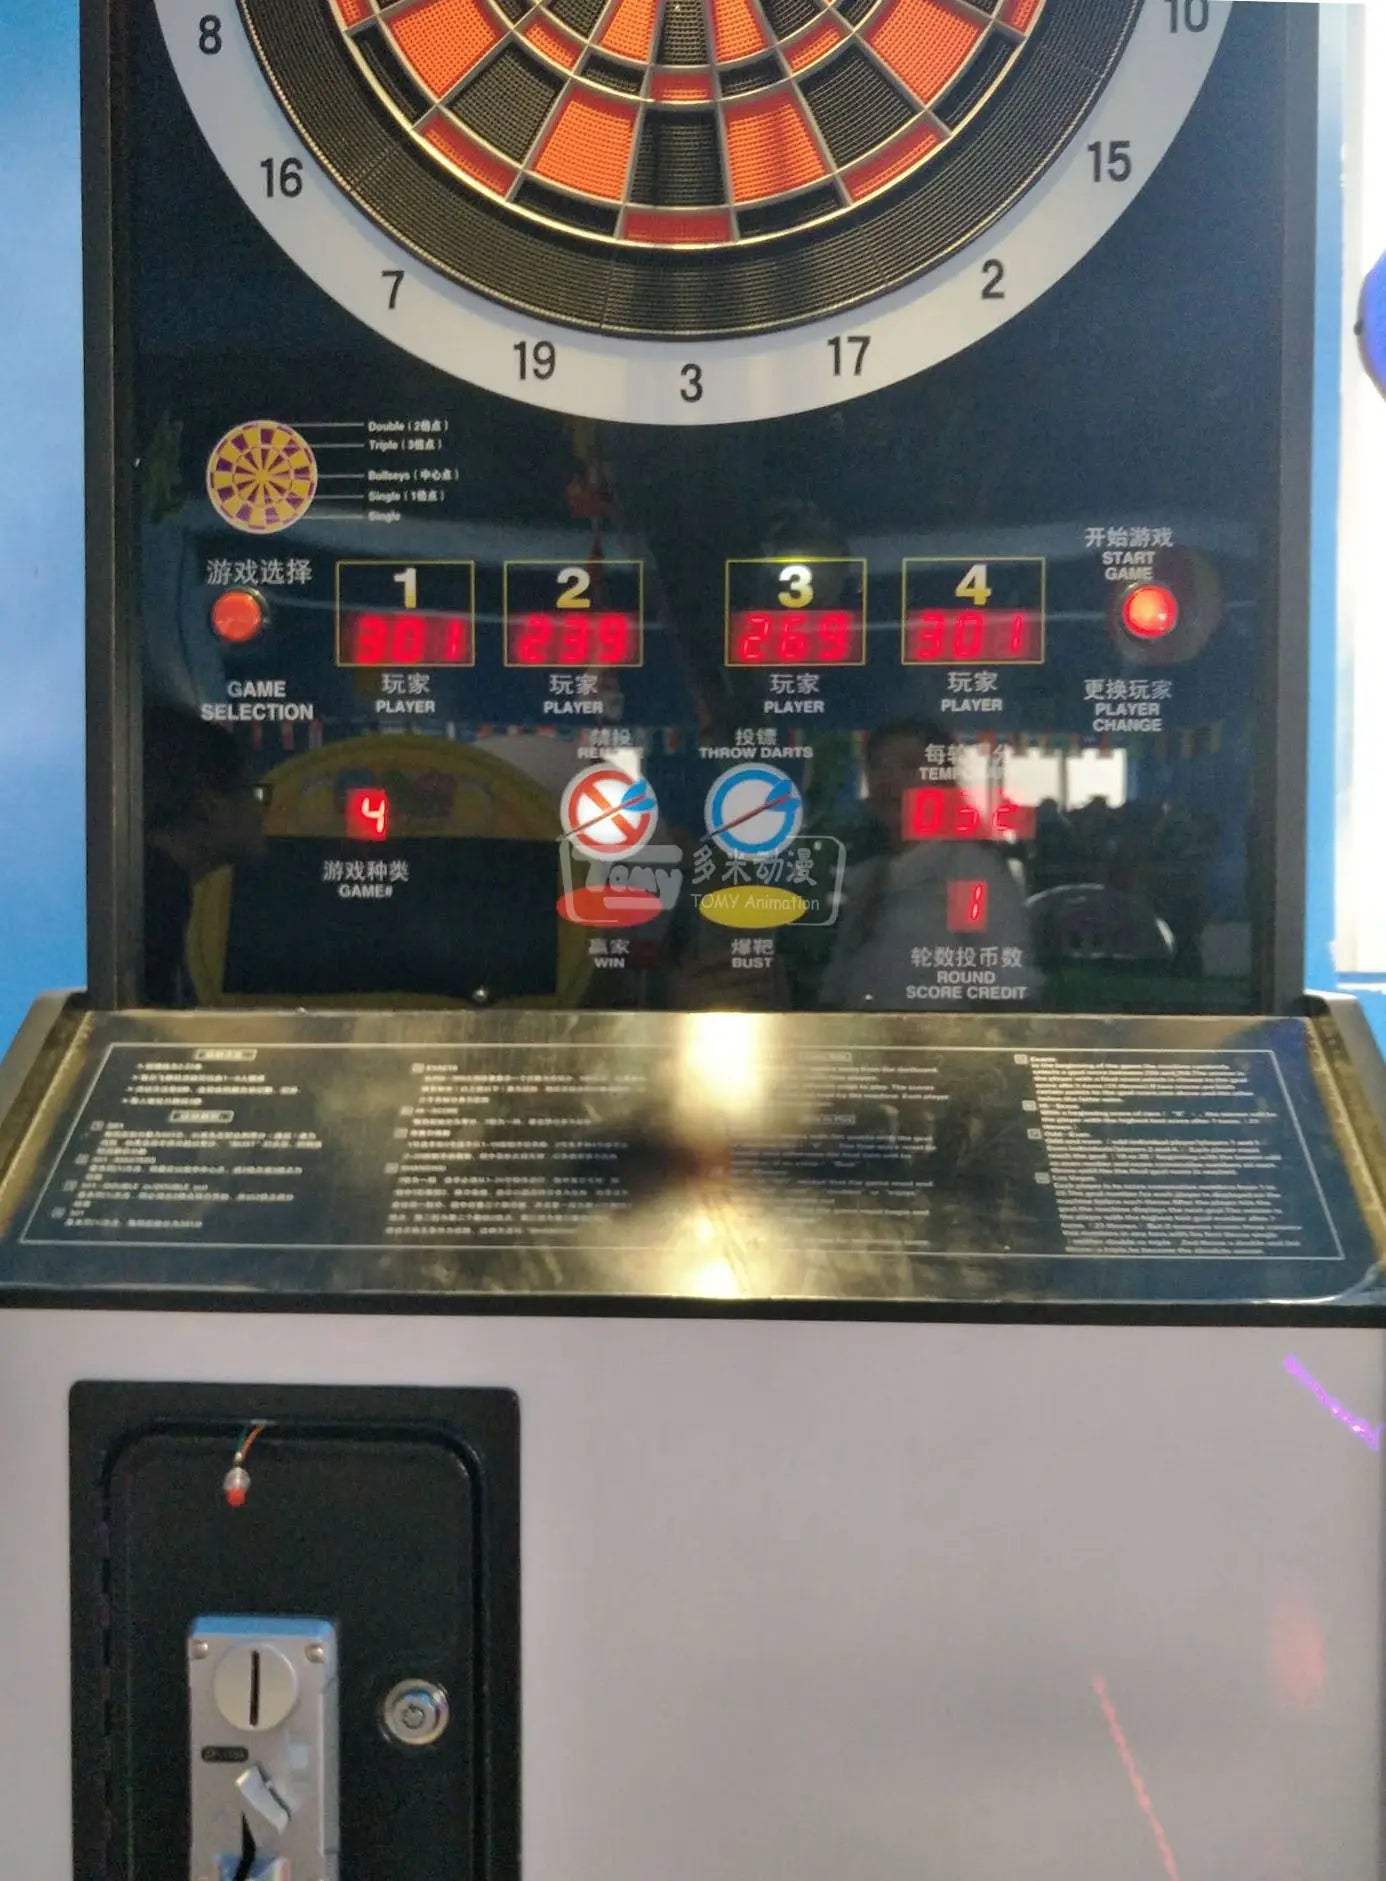 best-electronic-dart-board-2022-dcf-darts-FEC-FFC-Amusement-Coin-Operated-Electronic-Connection-Dart-Indoor-club-Game-machine-Sport-series-Tomy-Arcade